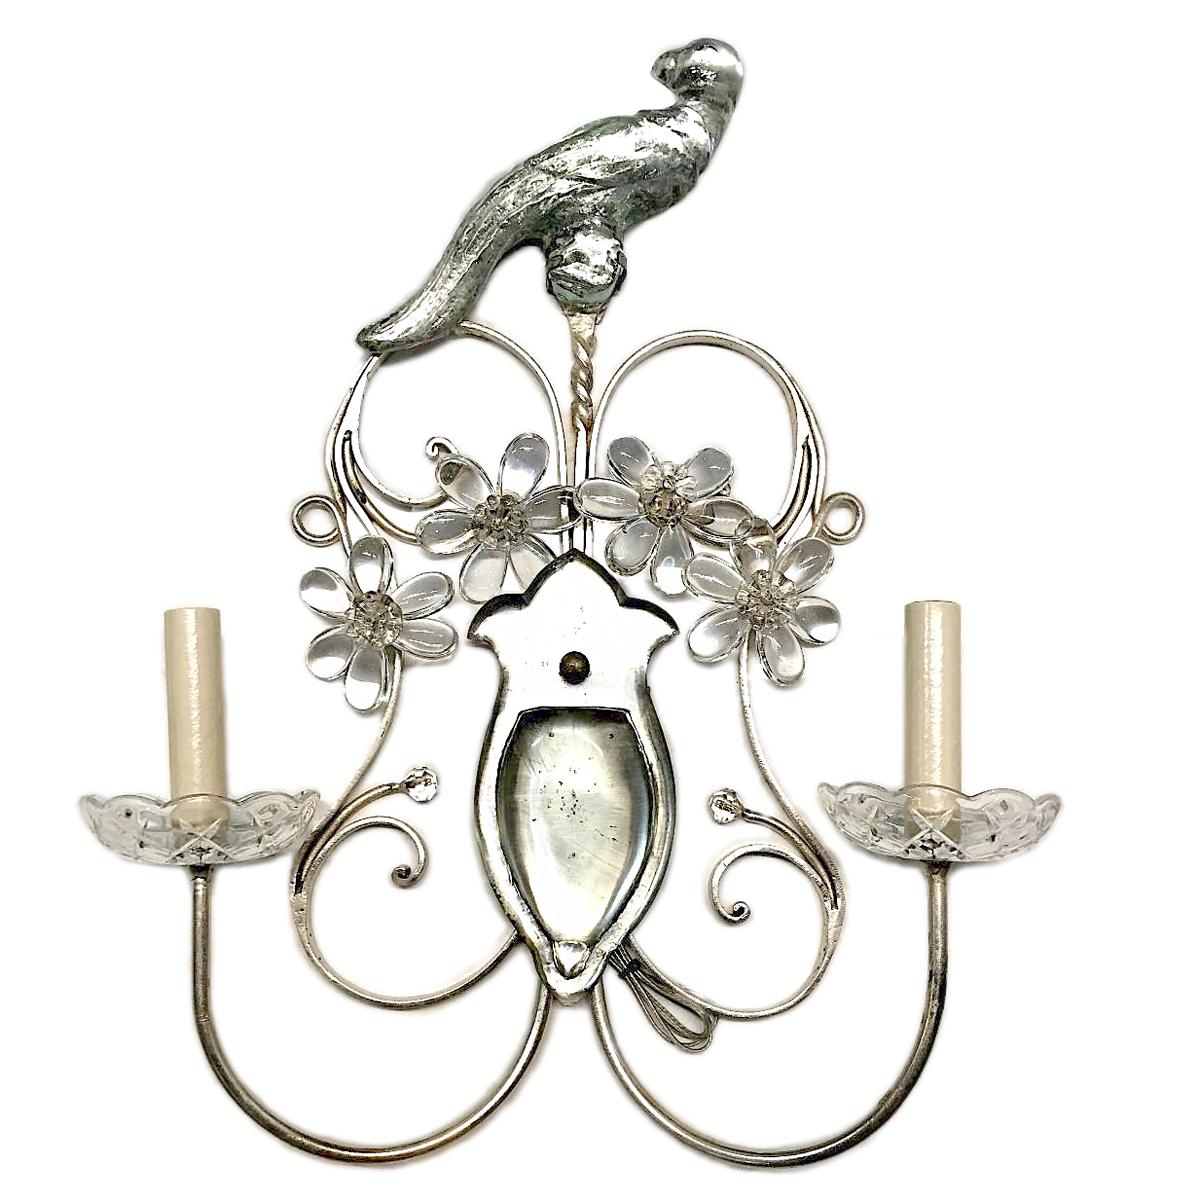 Pair of 1940s French silver plated sconces with molded glass birds and crystal flowers.

Measurements:
Height 21